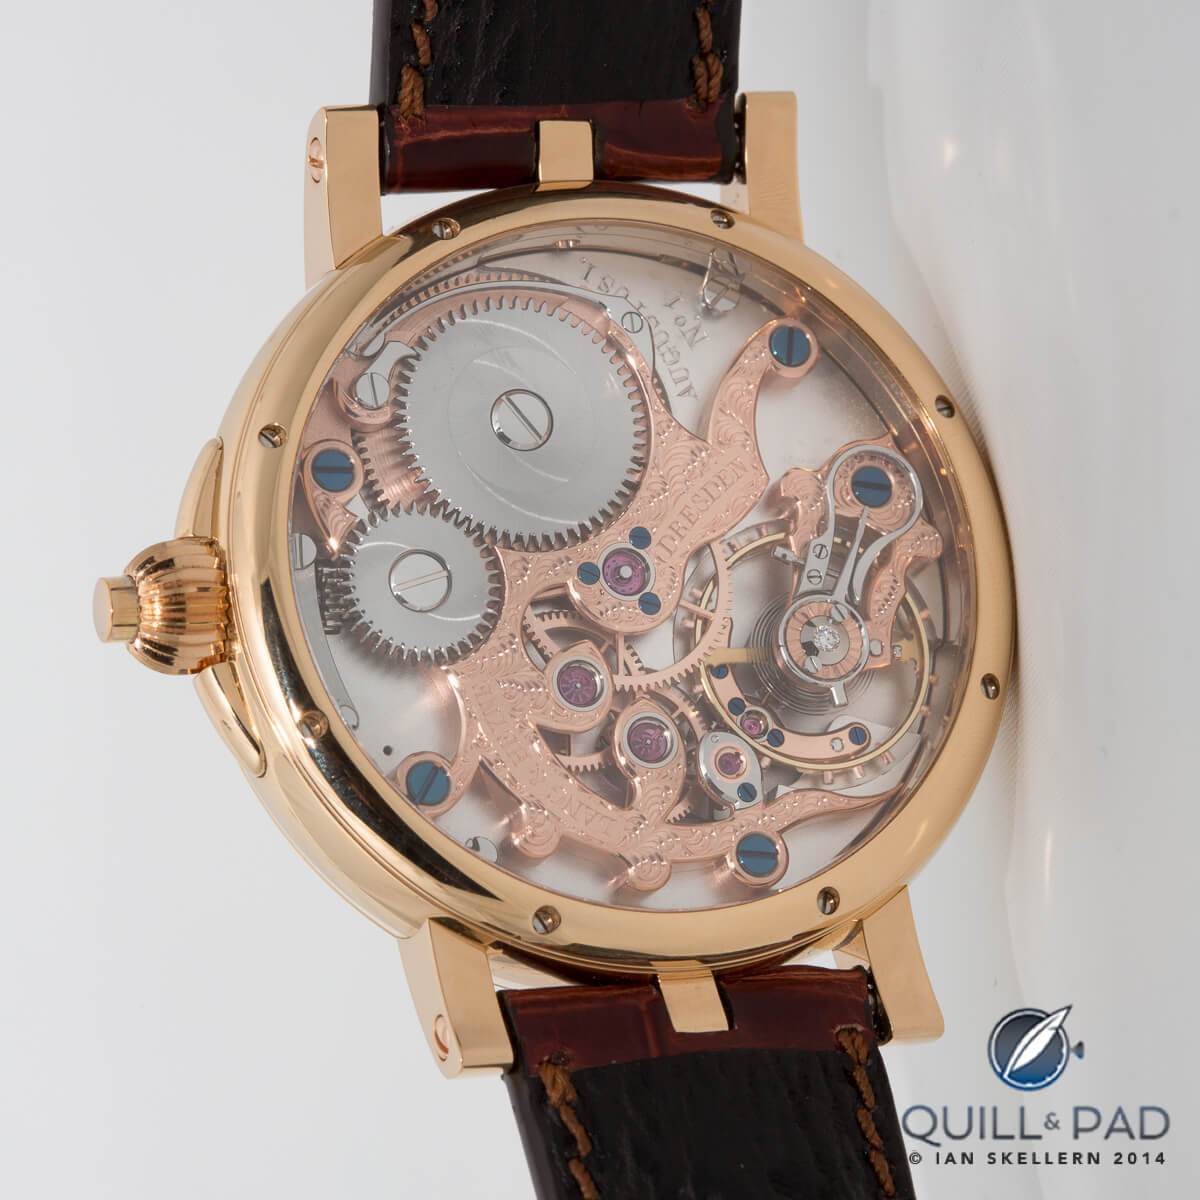 The hand engraved movement of the Lange & Heyne Augustus